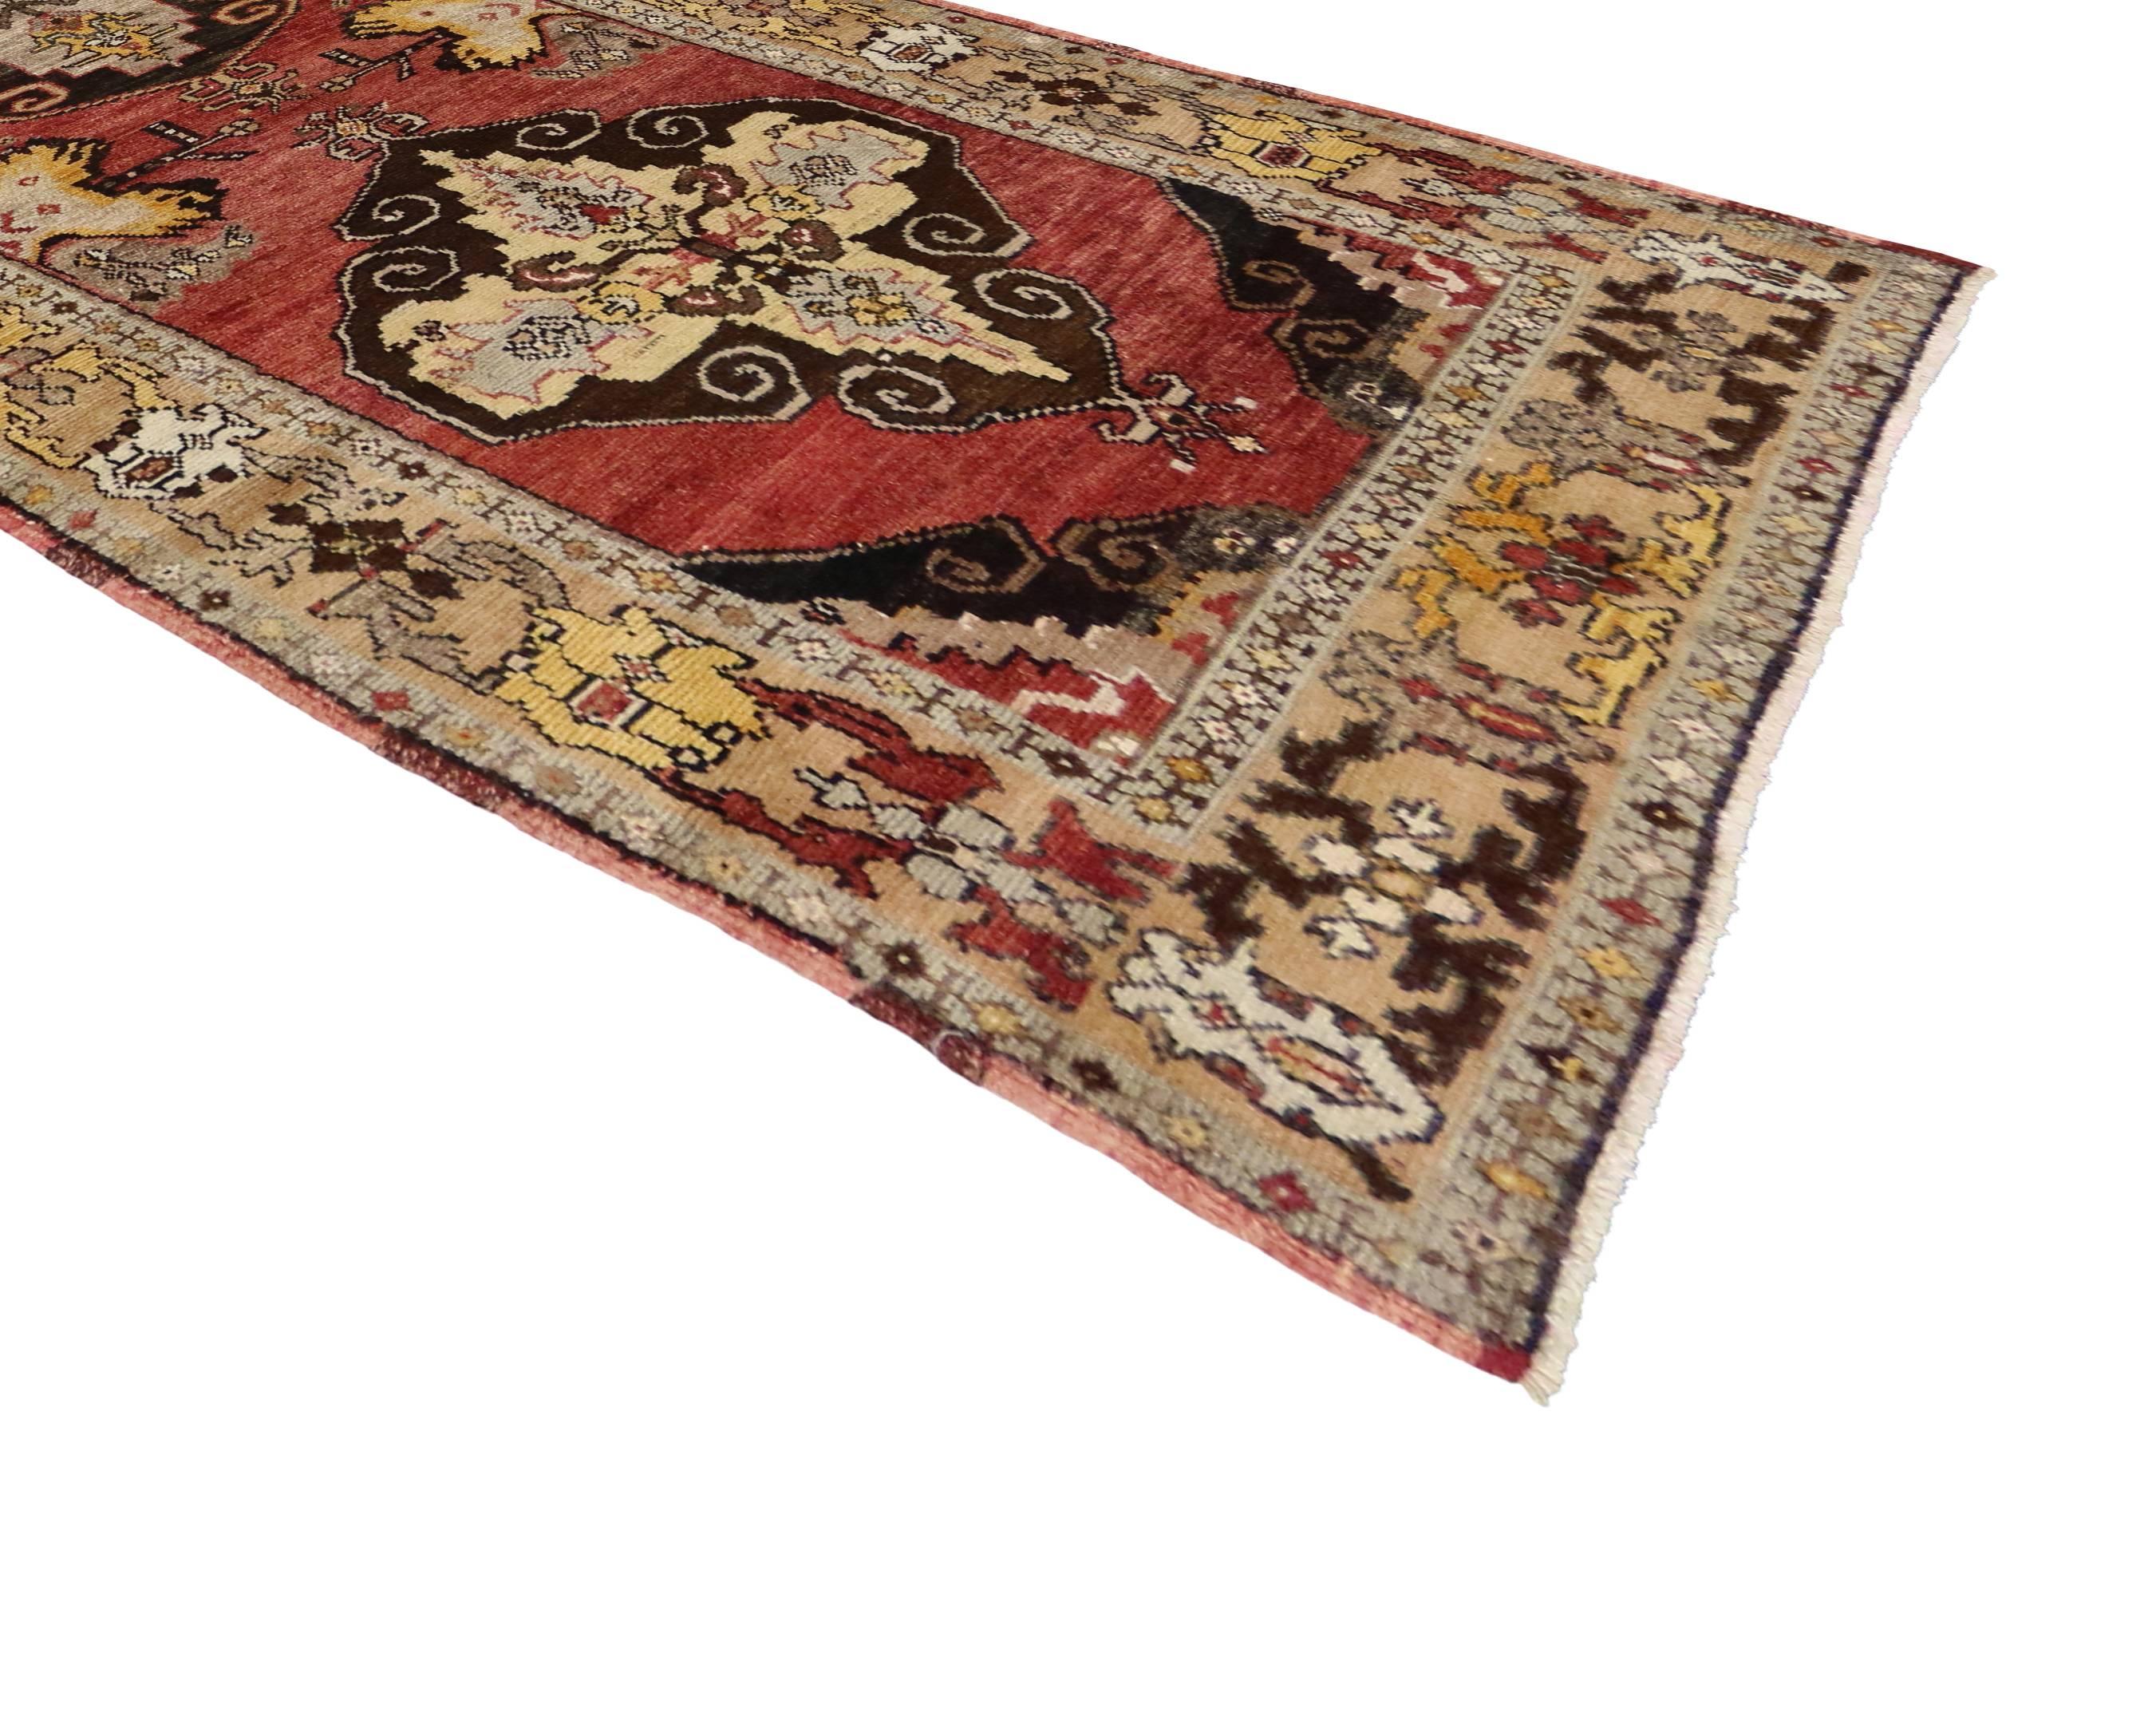 50167 Vintage Turkish Oushak Runner with Mid-Century Modern Style 04'00 x 11'06. Warm and inviting, this hand-knotted wool vintage Turkish Oushak runner embodies Mid-Century Modern style. The abrashed brick red field features three amulet-style